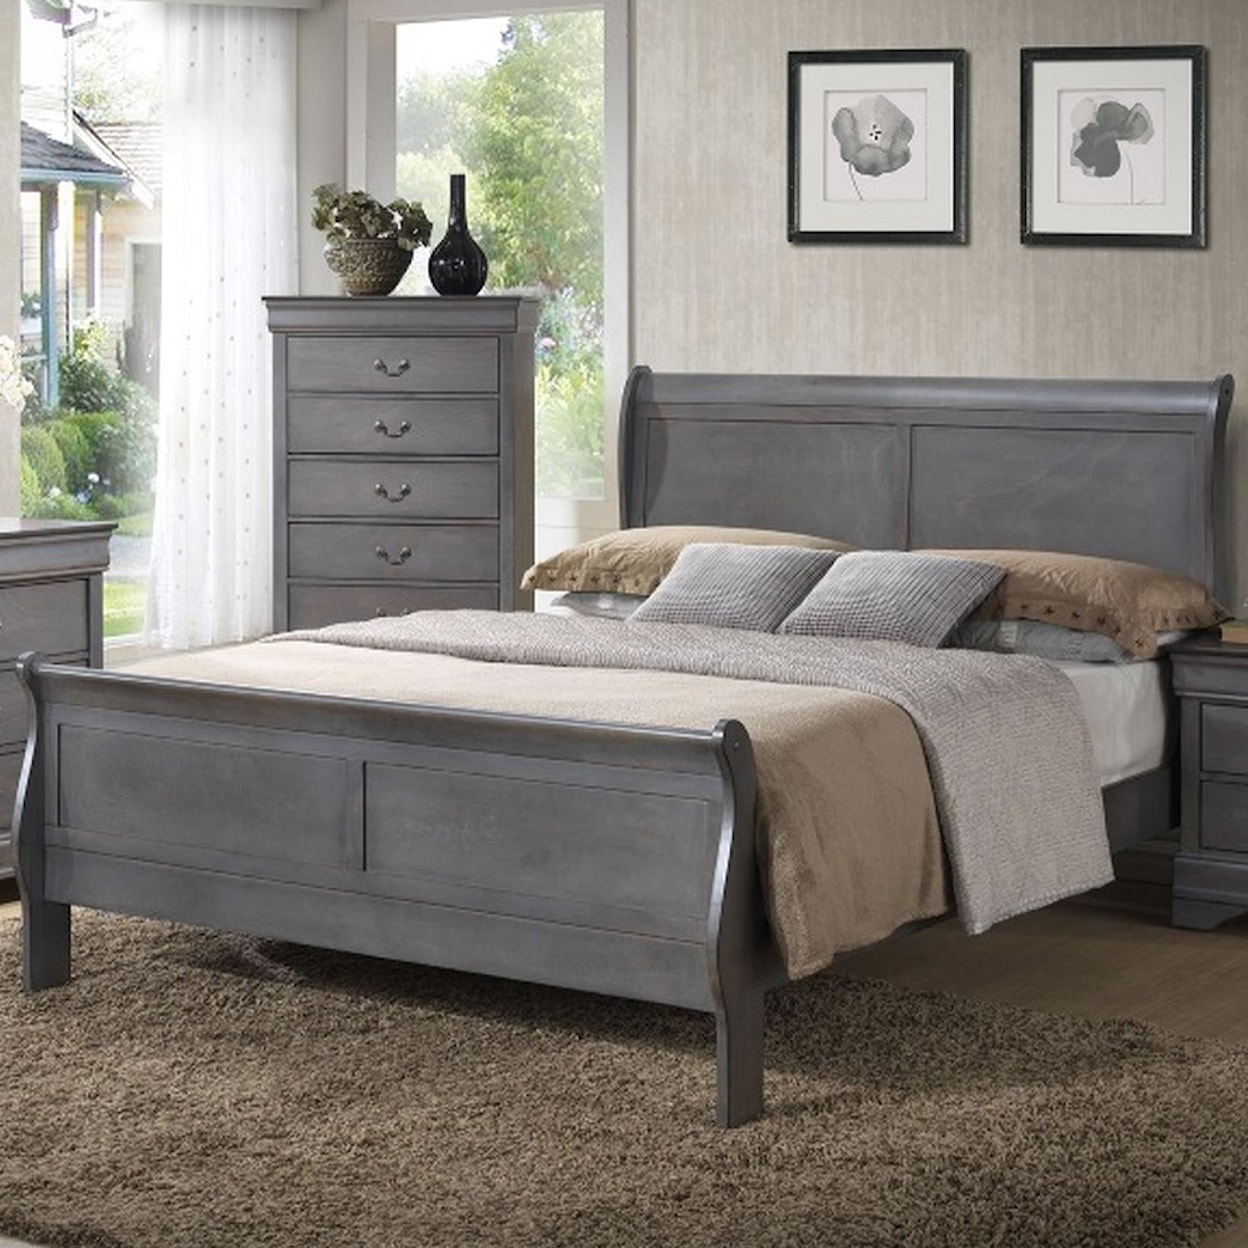 Lifestyle 5934 Queen Sleigh Bed